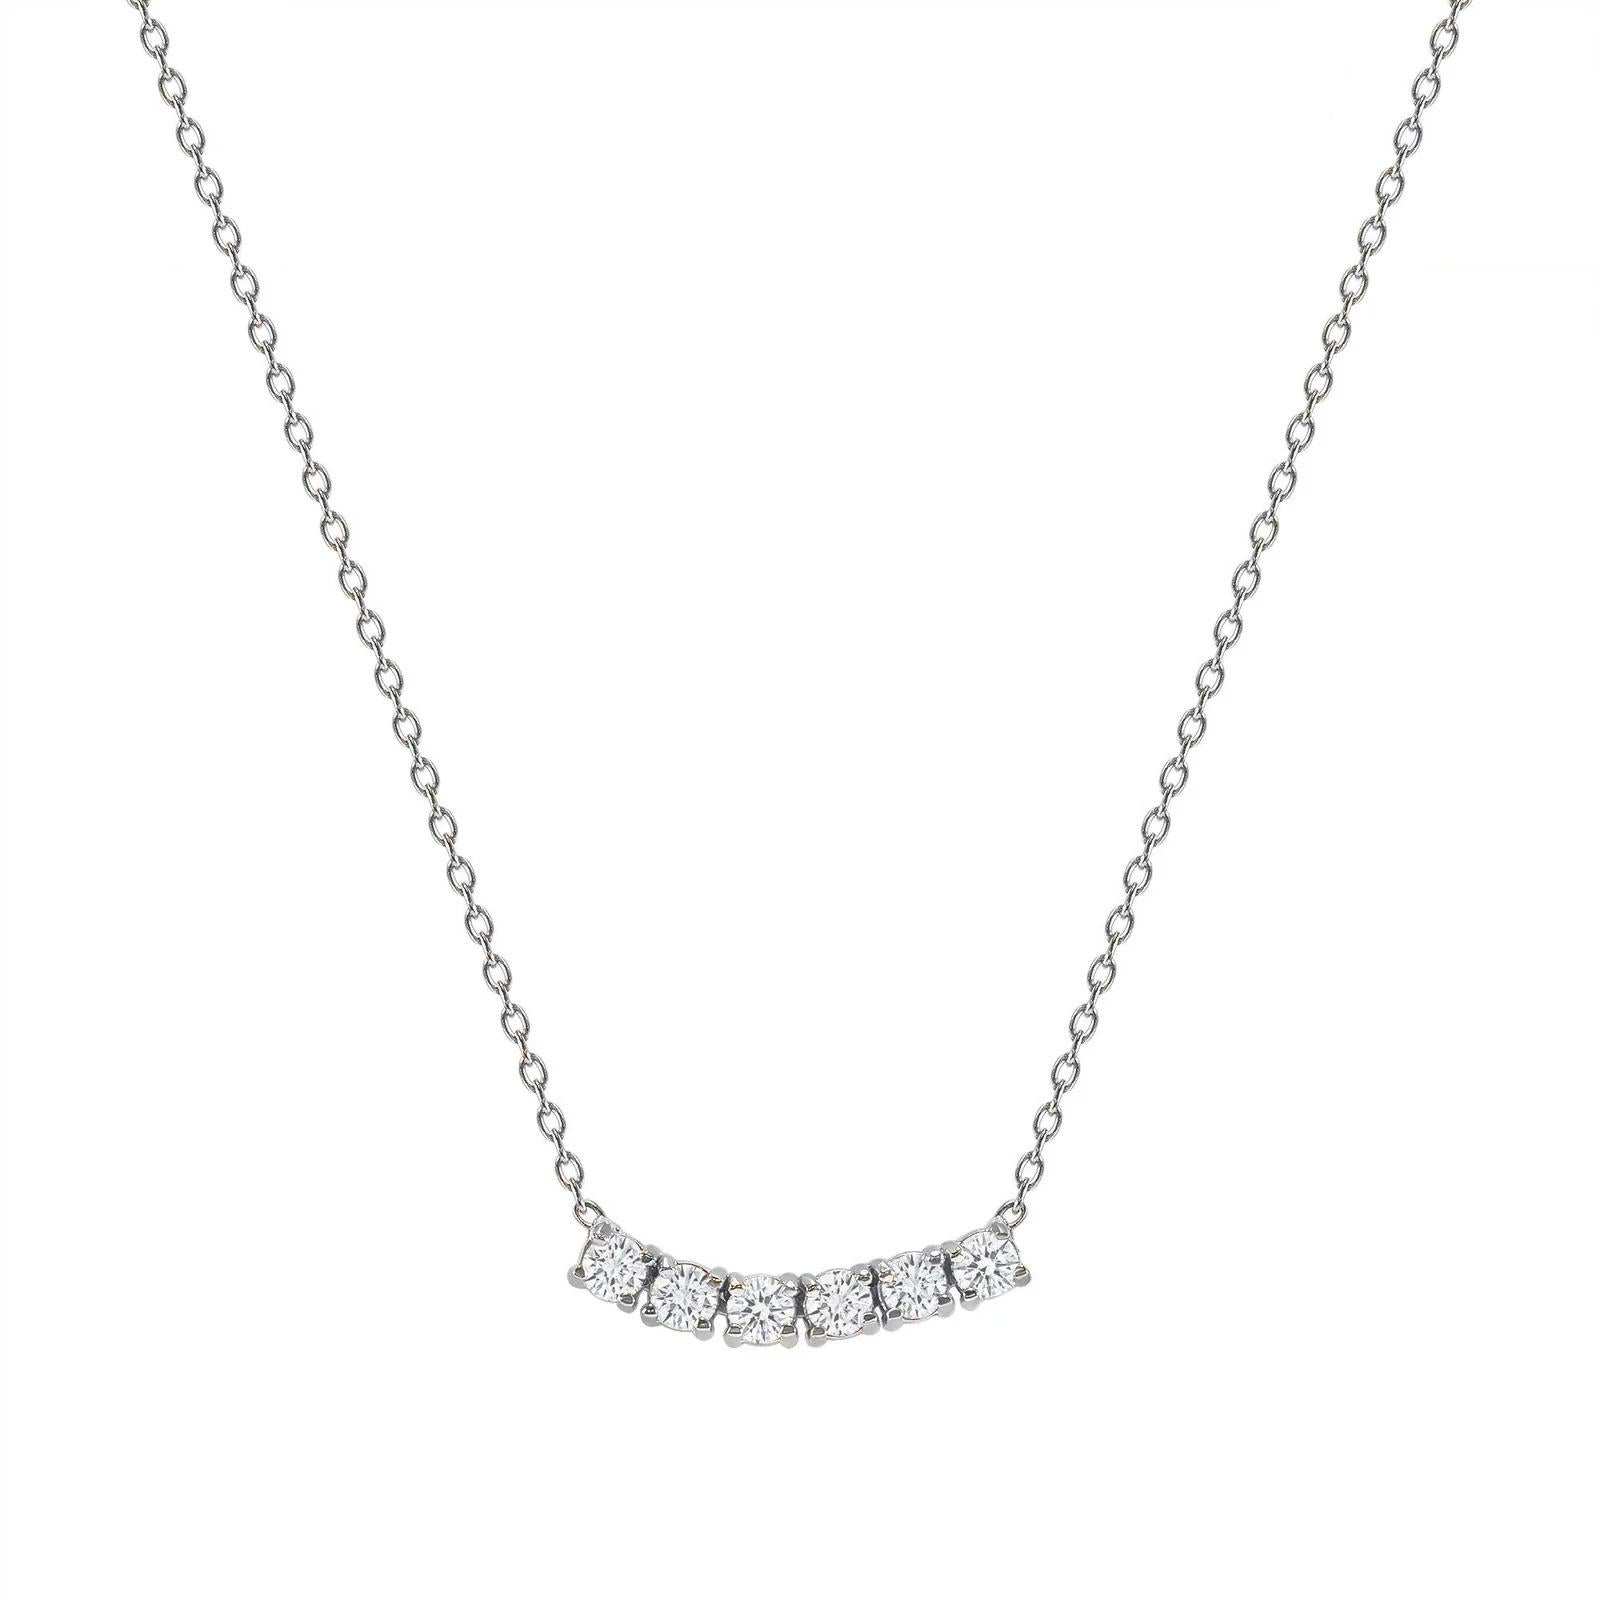 This petite, curved diamond necklace is crafted with gorgeous 14k gold set with six round diamonds.  

Gold: 14k 
Diamond Total Carats: 0.50ct
Diamond Cut: Round (6 diamonds)
Diamond Clarity: VS
Diamond Color: F
Color: White Gold
Necklace Length: 18